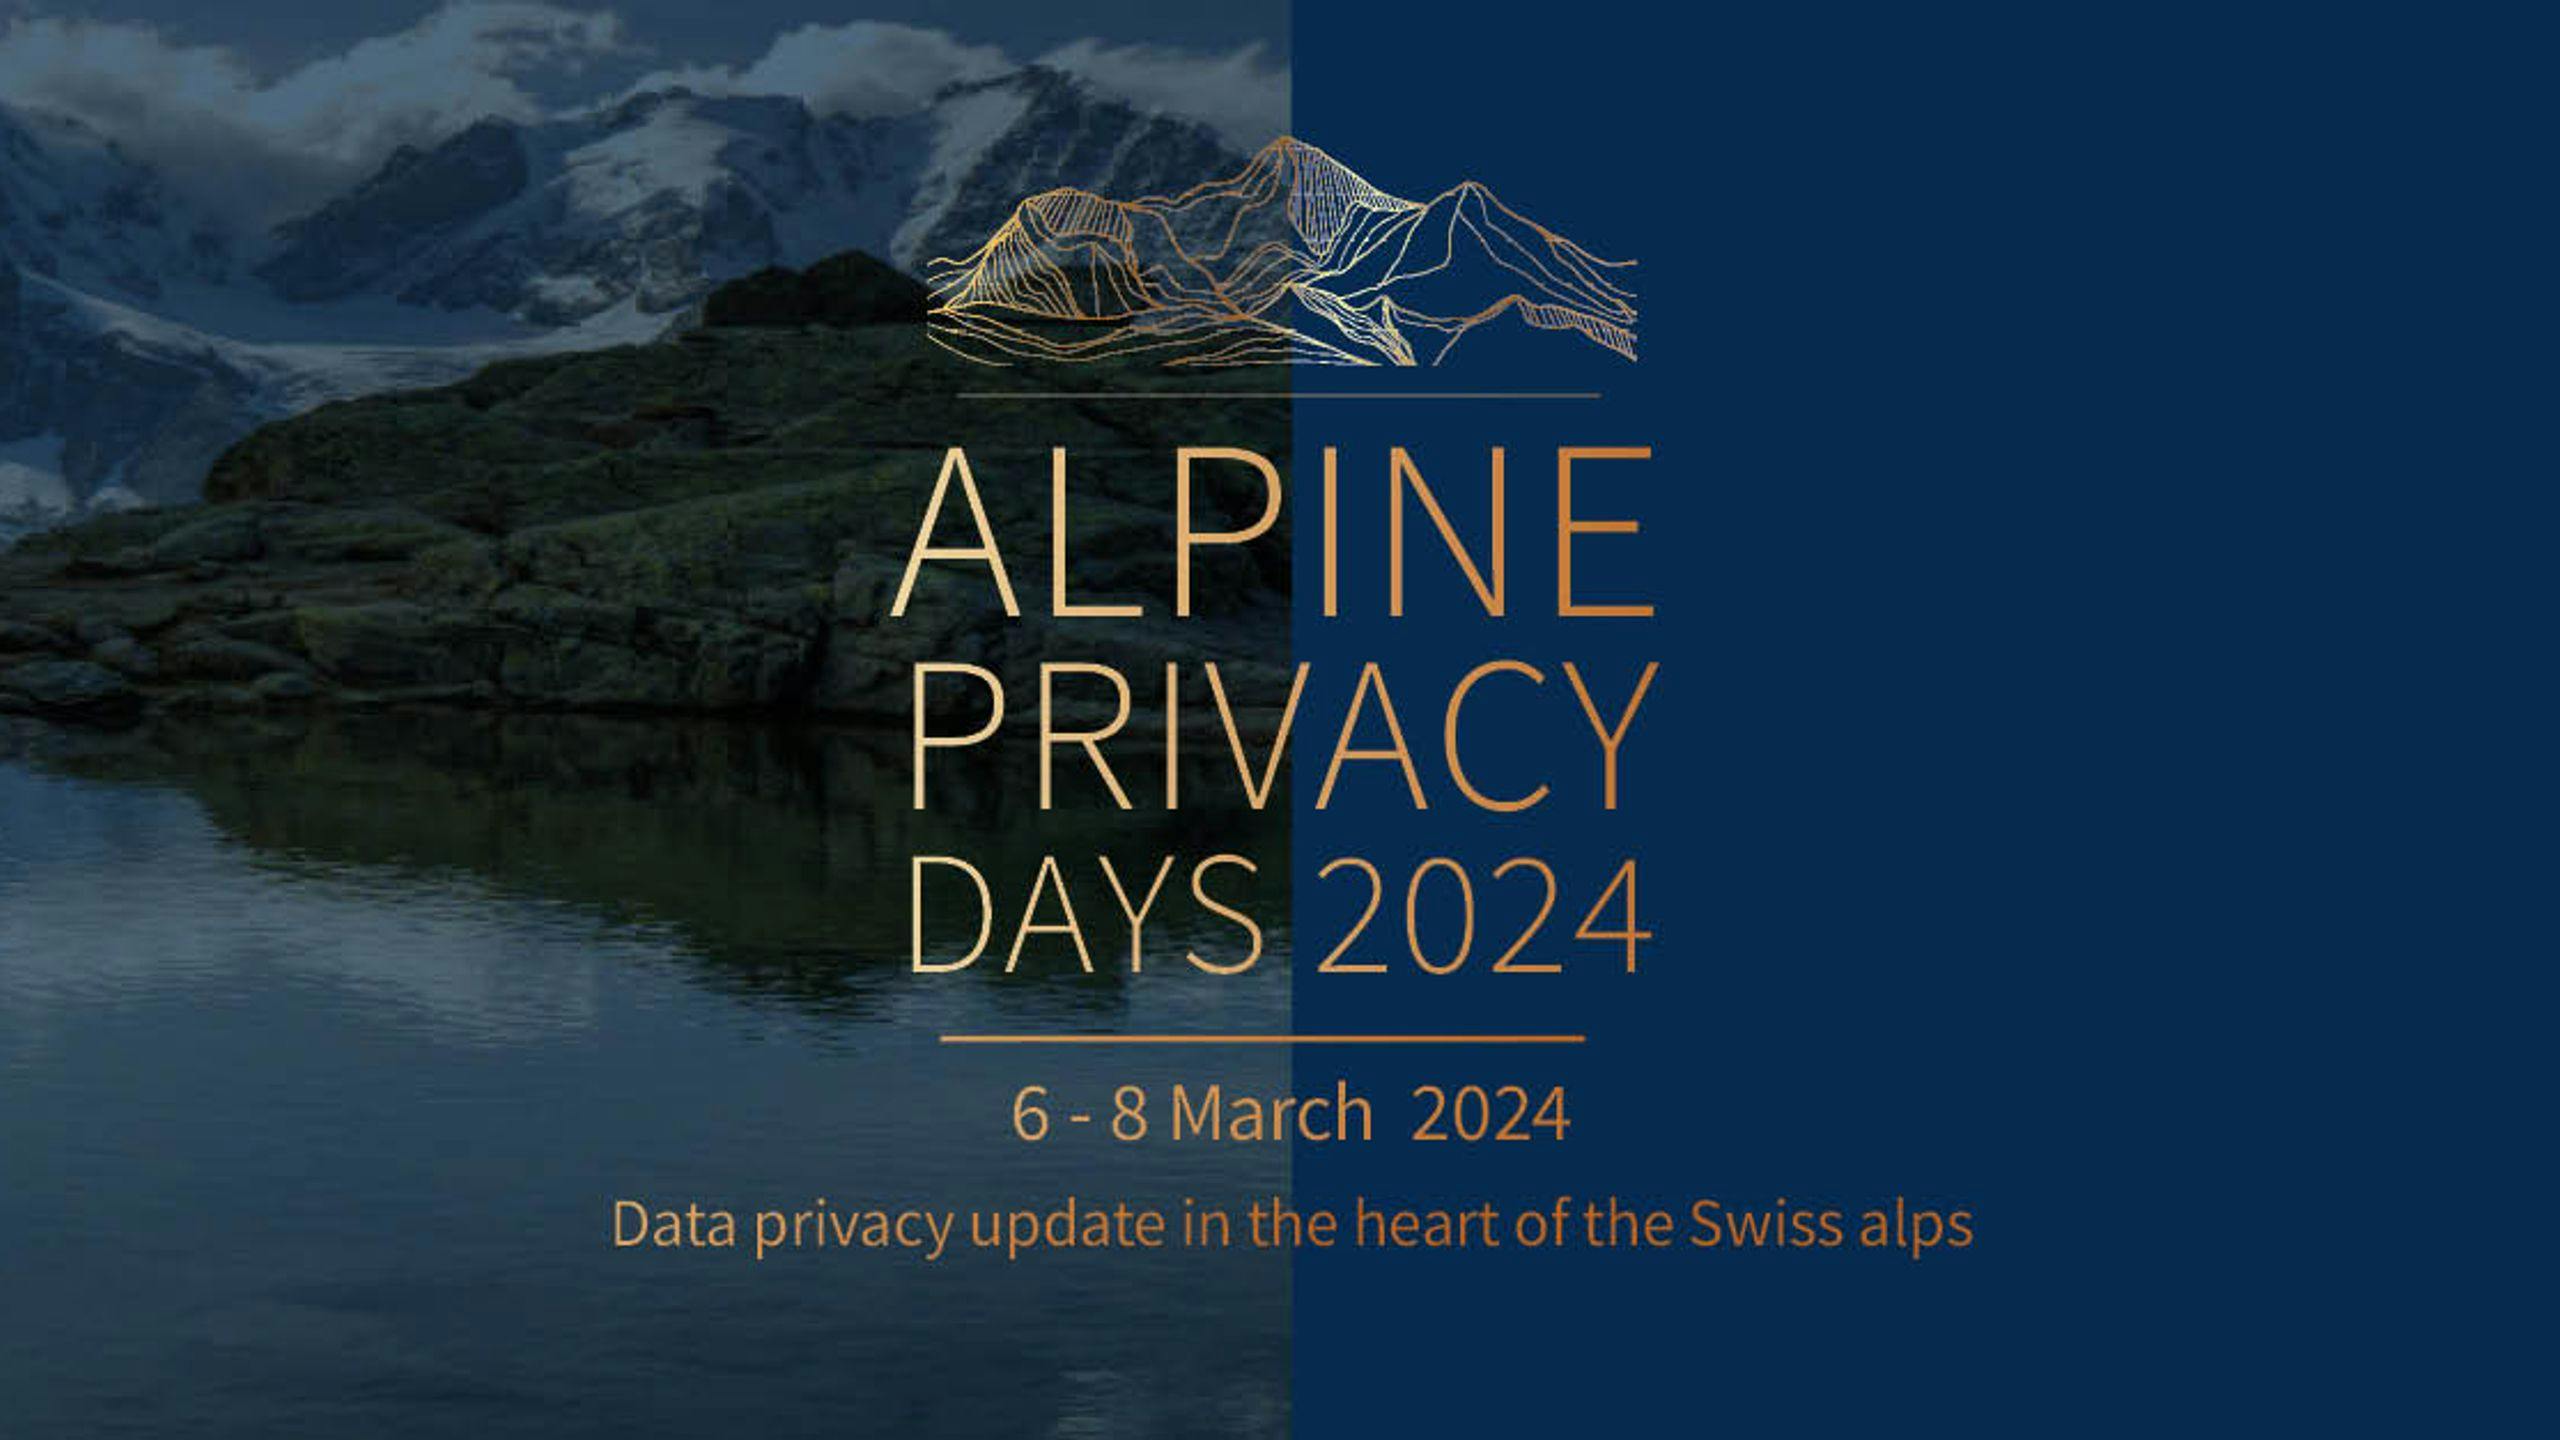 Join the most interesting privacy conference of the year! 